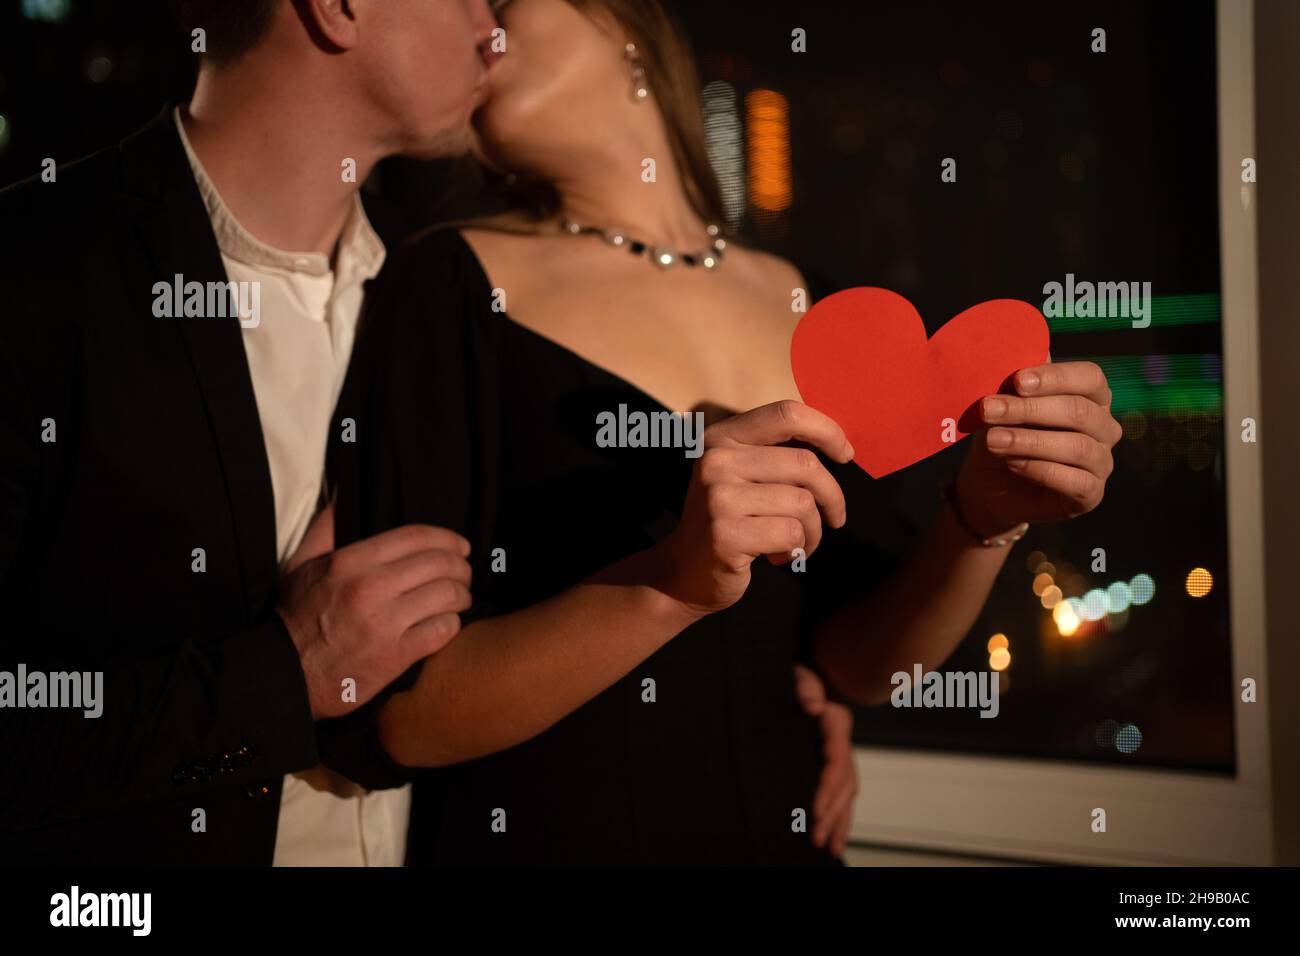 valentine's day, passionate kiss in the evening by the window, night date in the apartment, man kissing a woman, red heart in female hands, close-up Stock Photo